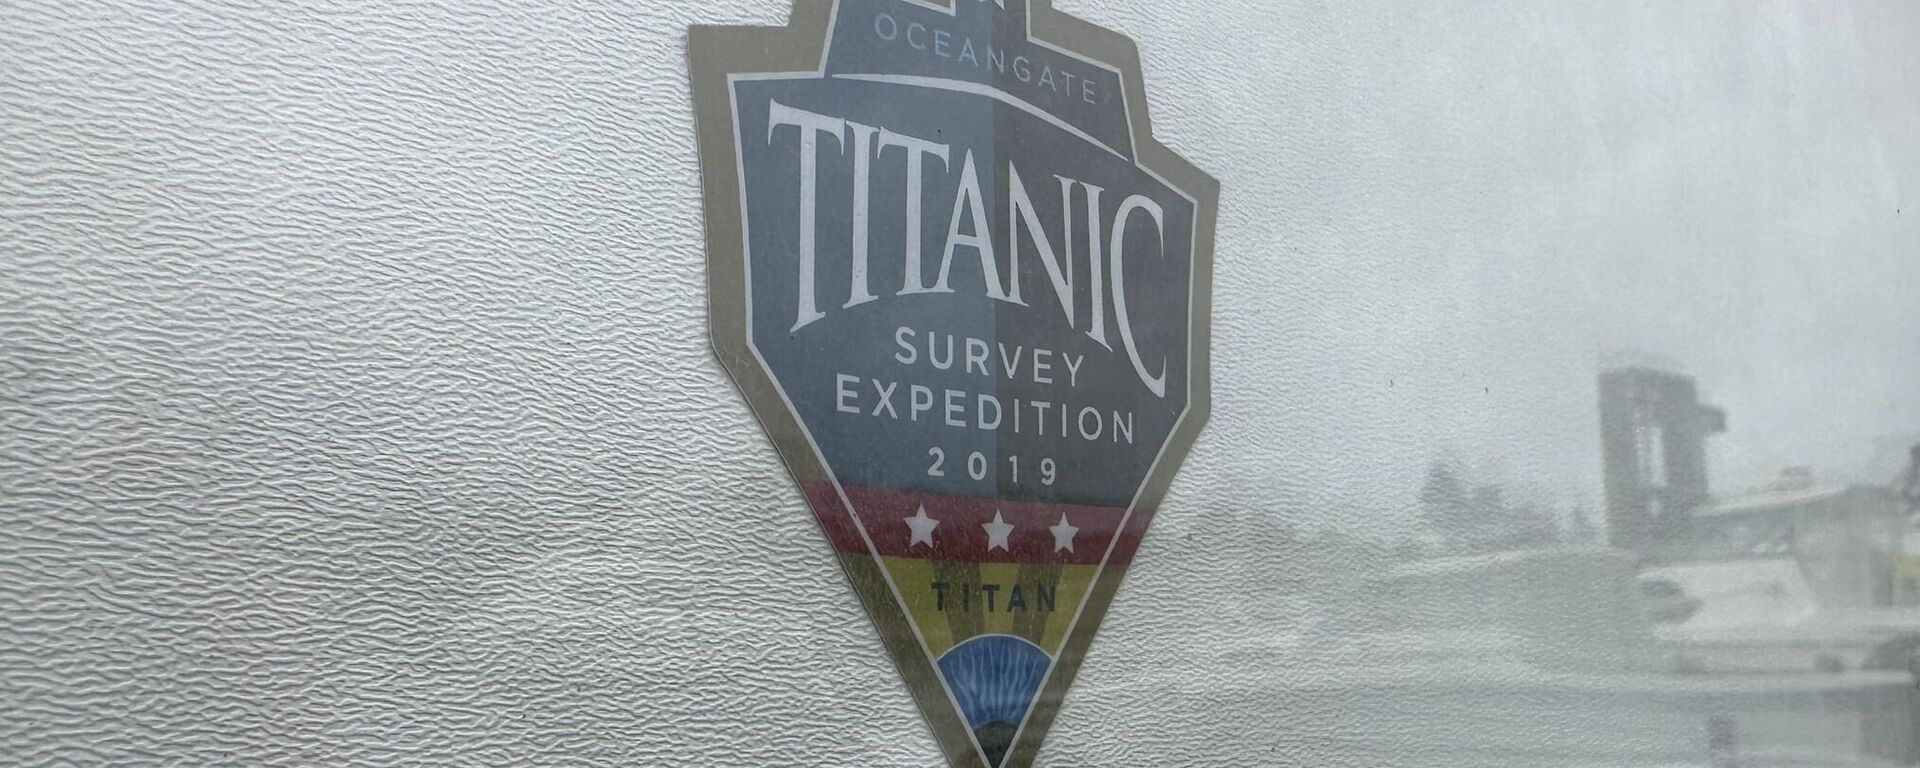 The logo for an OceanGate Expeditions 2019 Titanic expedition is seen on a marine industrial warehouse office door in Everett, Wash., Tuesday, June 20, 2023.  - Sputnik International, 1920, 22.06.2023